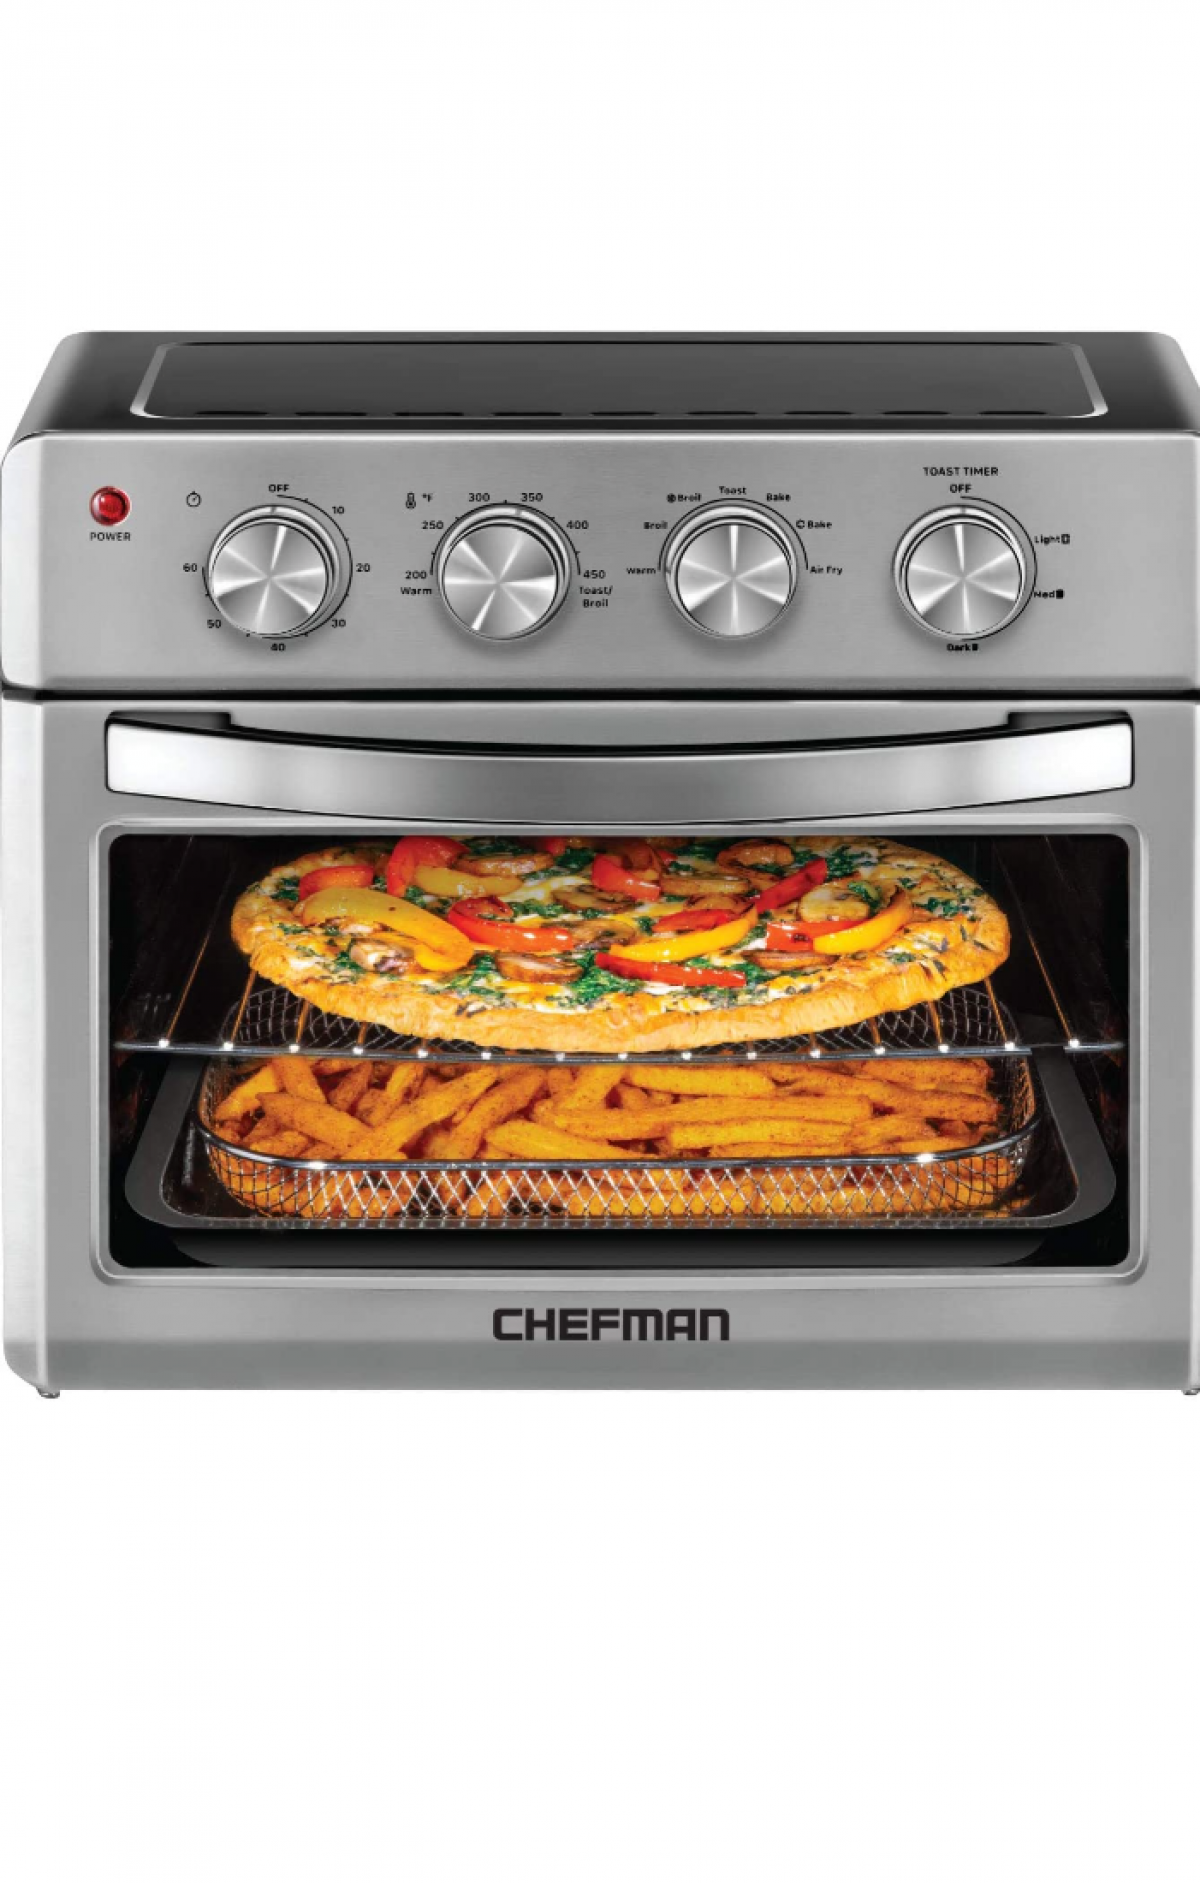 Chefman Air Fryer Toaster Oven, 6 Slice, 26 QT Con for sale in Portmore